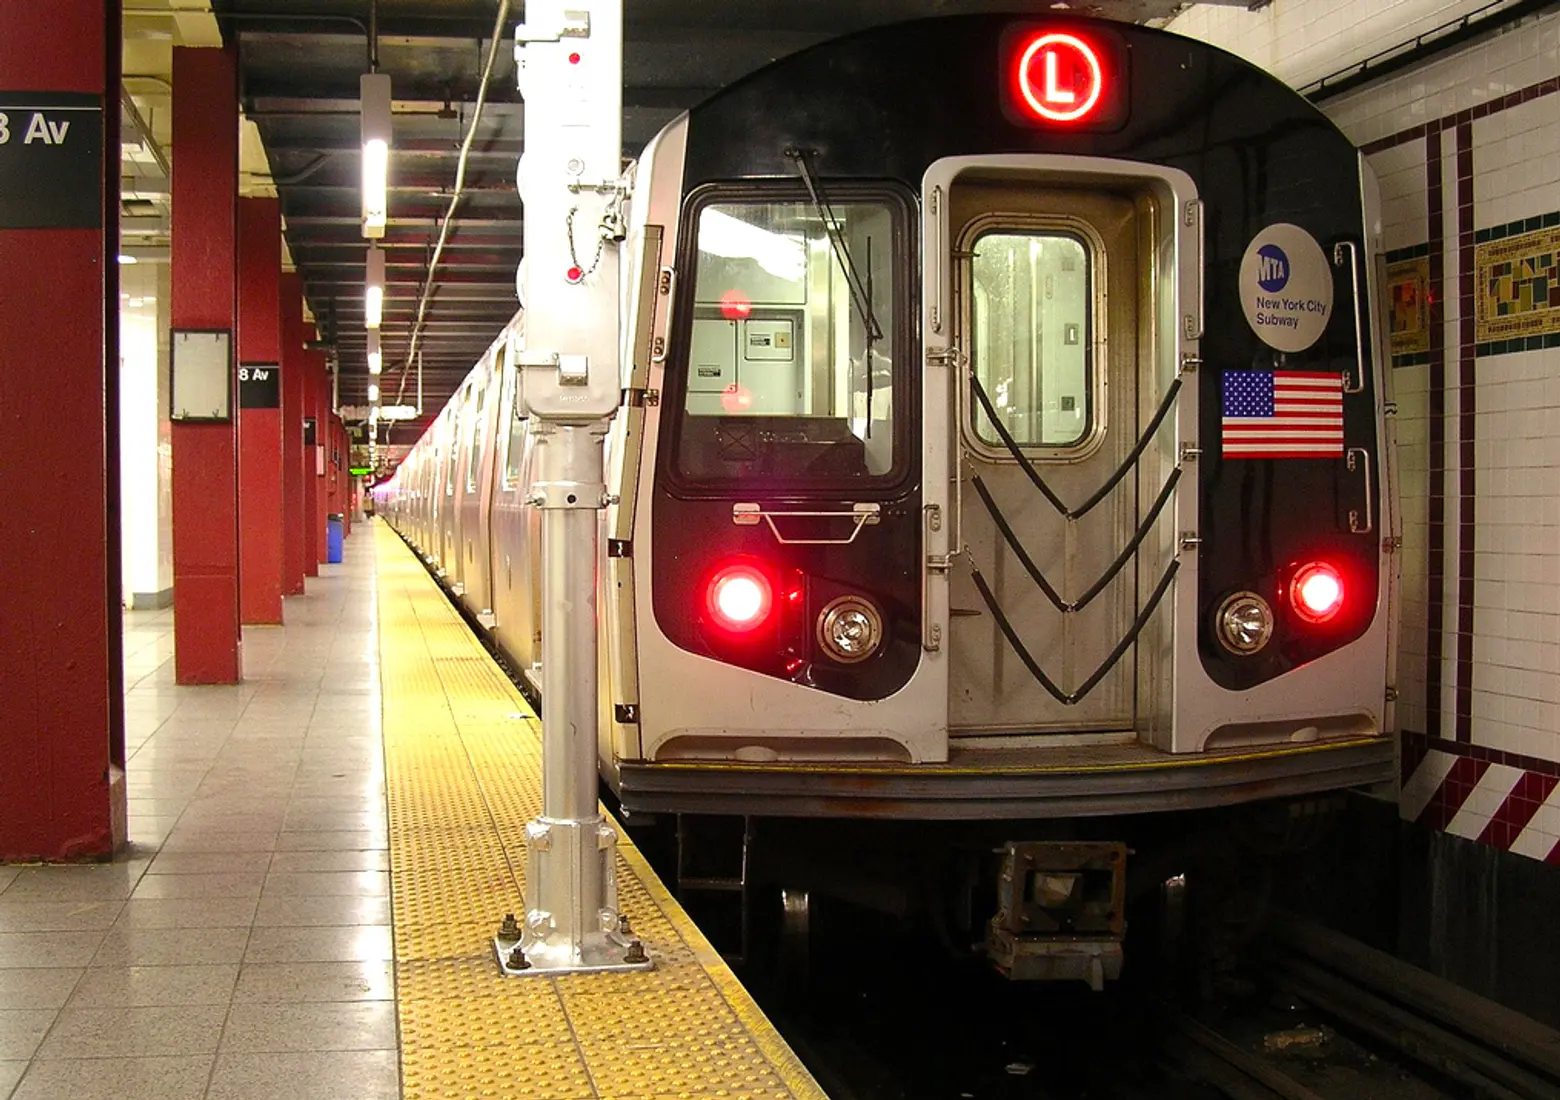 Five years ago, transit officials rejected L train plan similar to Cuomo’s over safety concerns